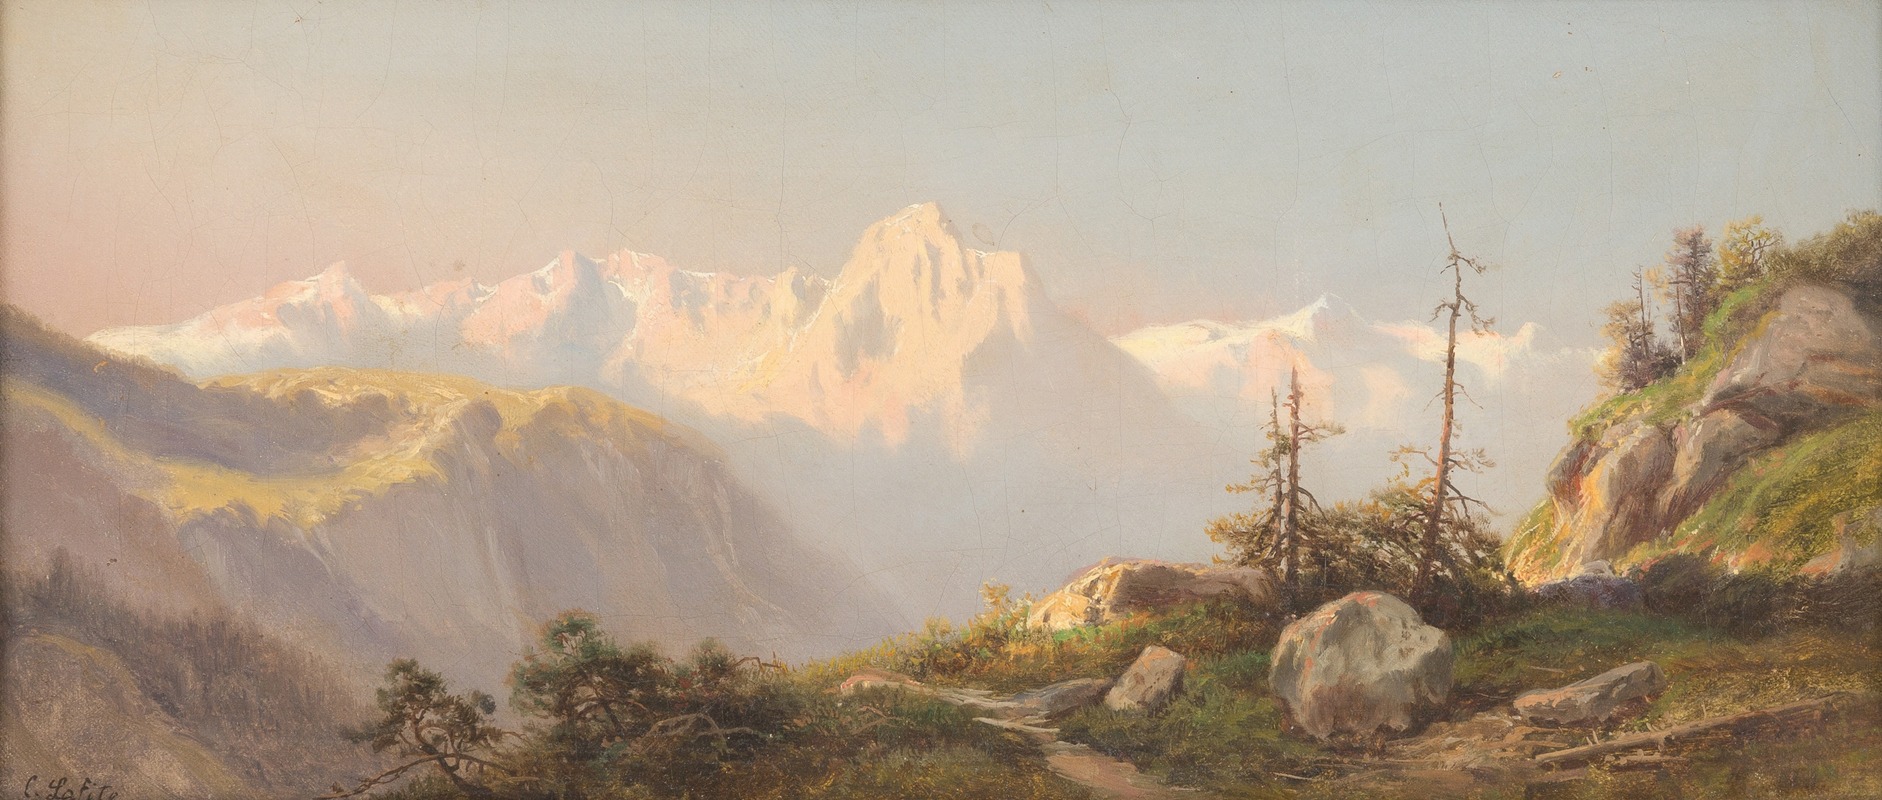 Carl Lafite - Sunset in the mountains